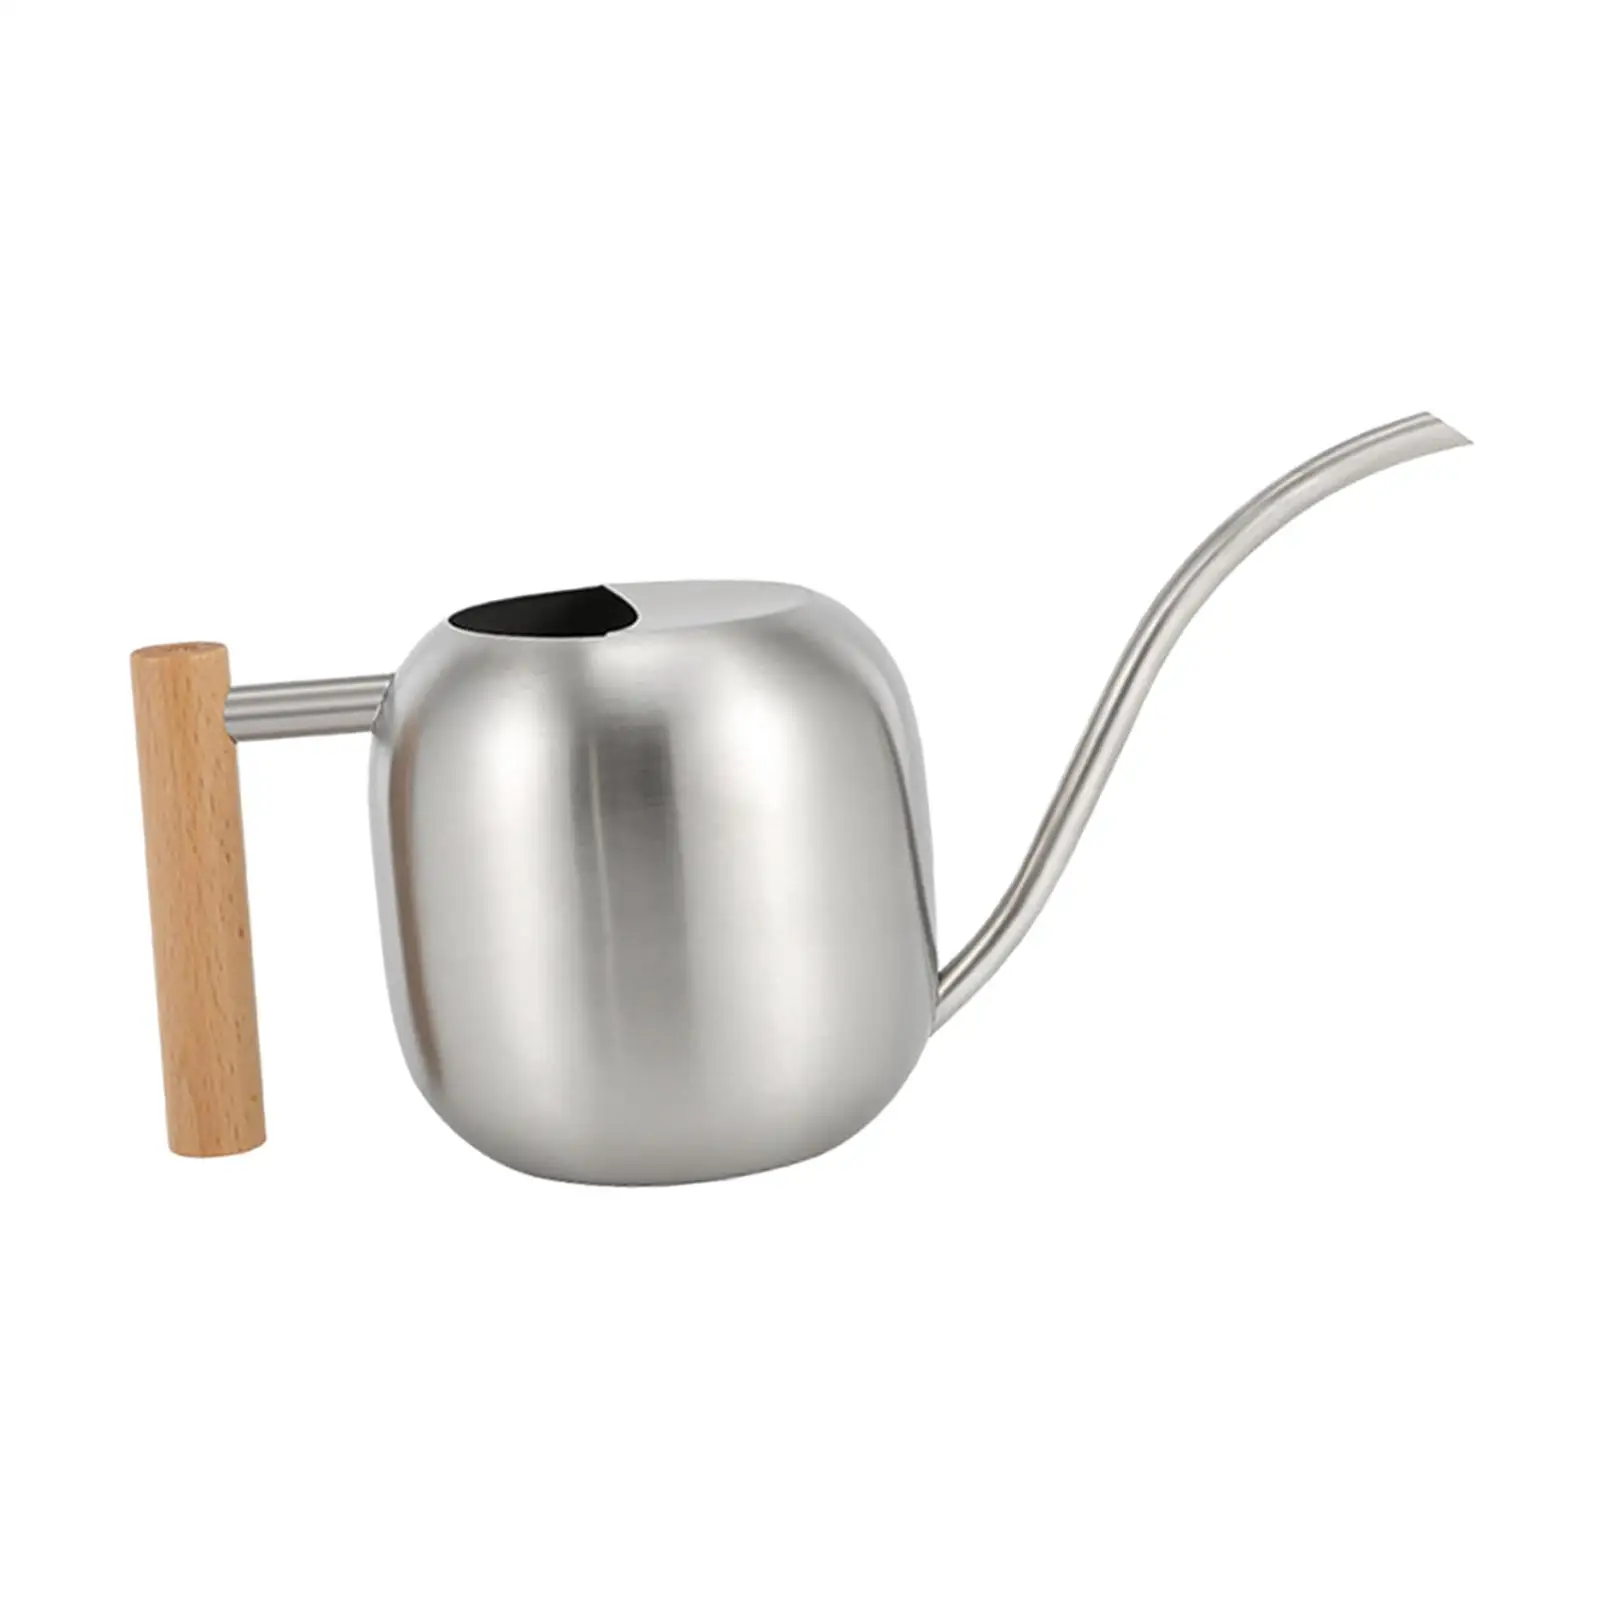 Stainless Steel Watering Can Small Wooden Handle for Outdoor Patio Decor